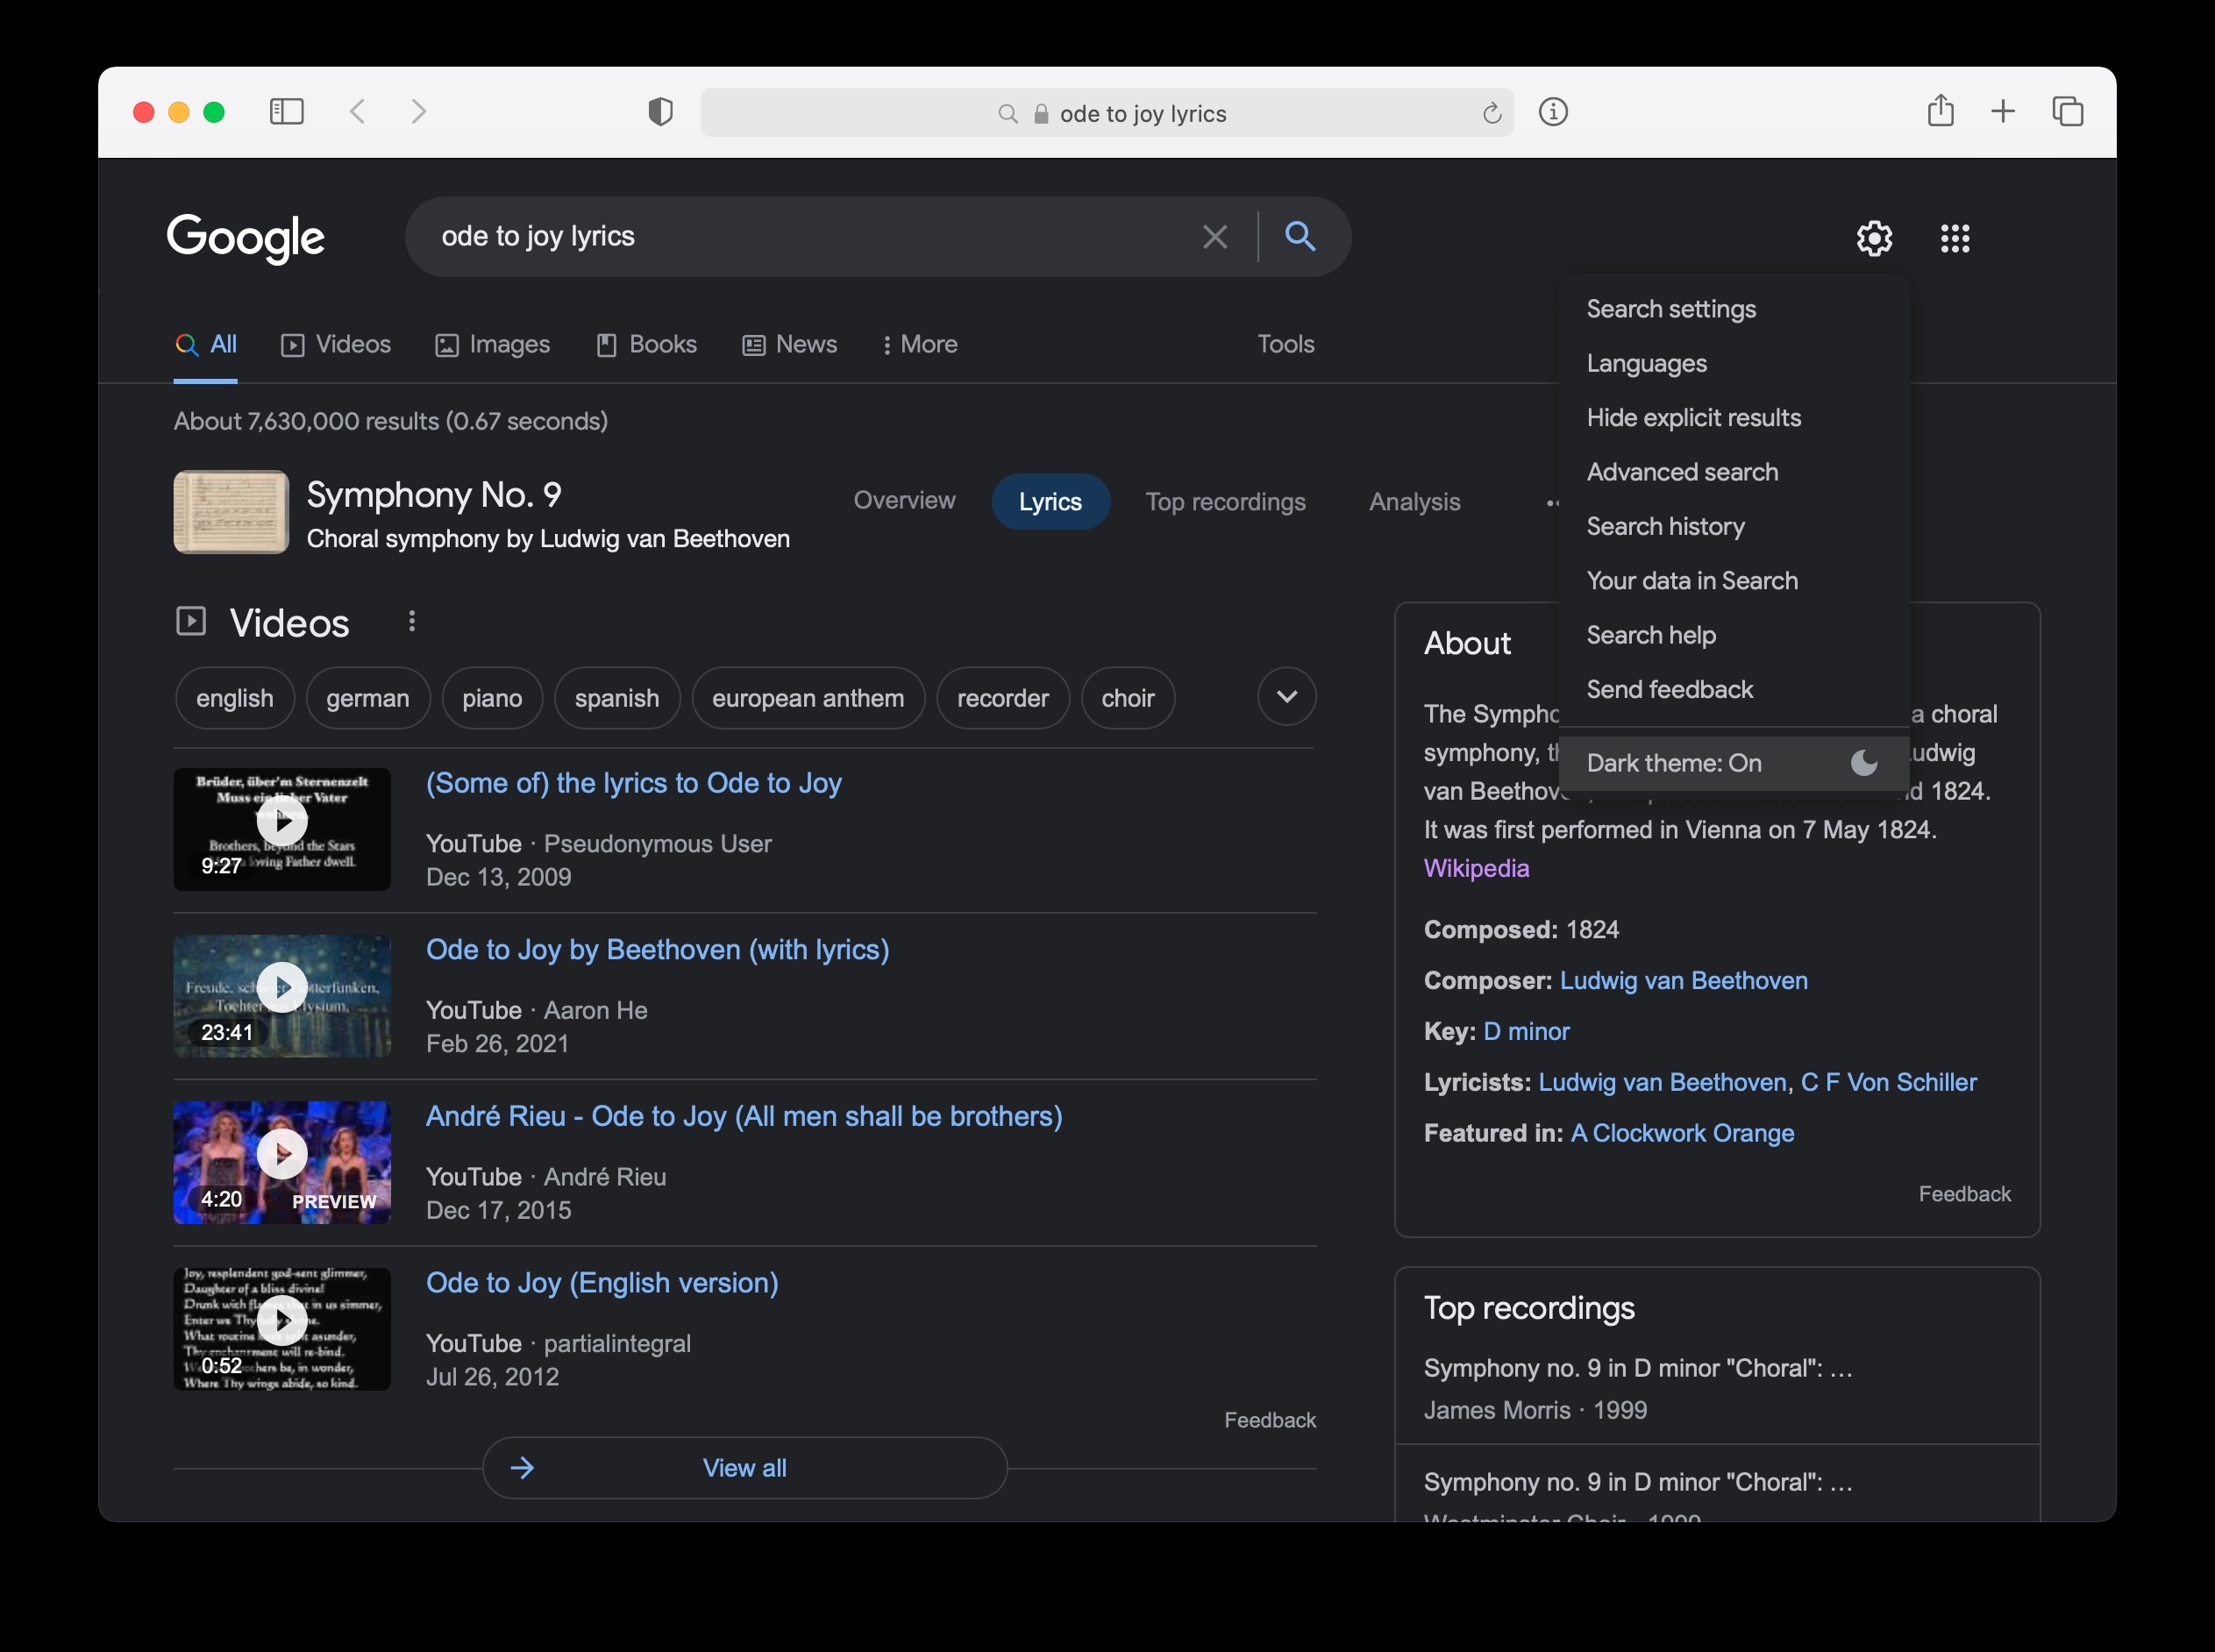 How to Disable / Enable Dark Mode on Google.com